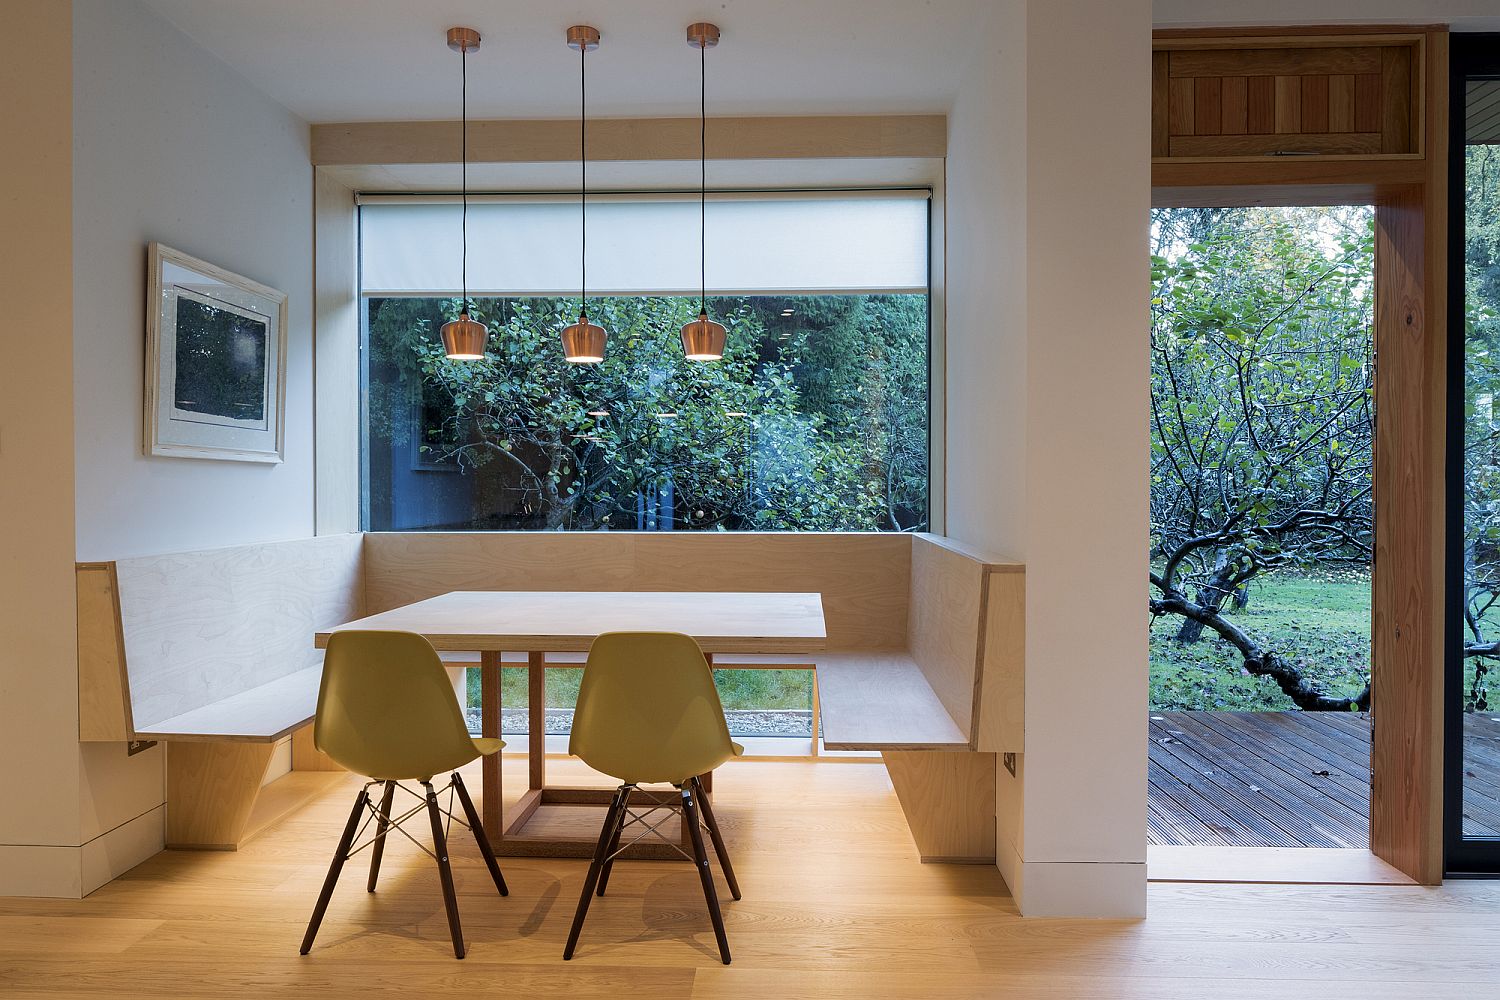 Floor-to-ceiling glass window brings light into the banquette styled dining area